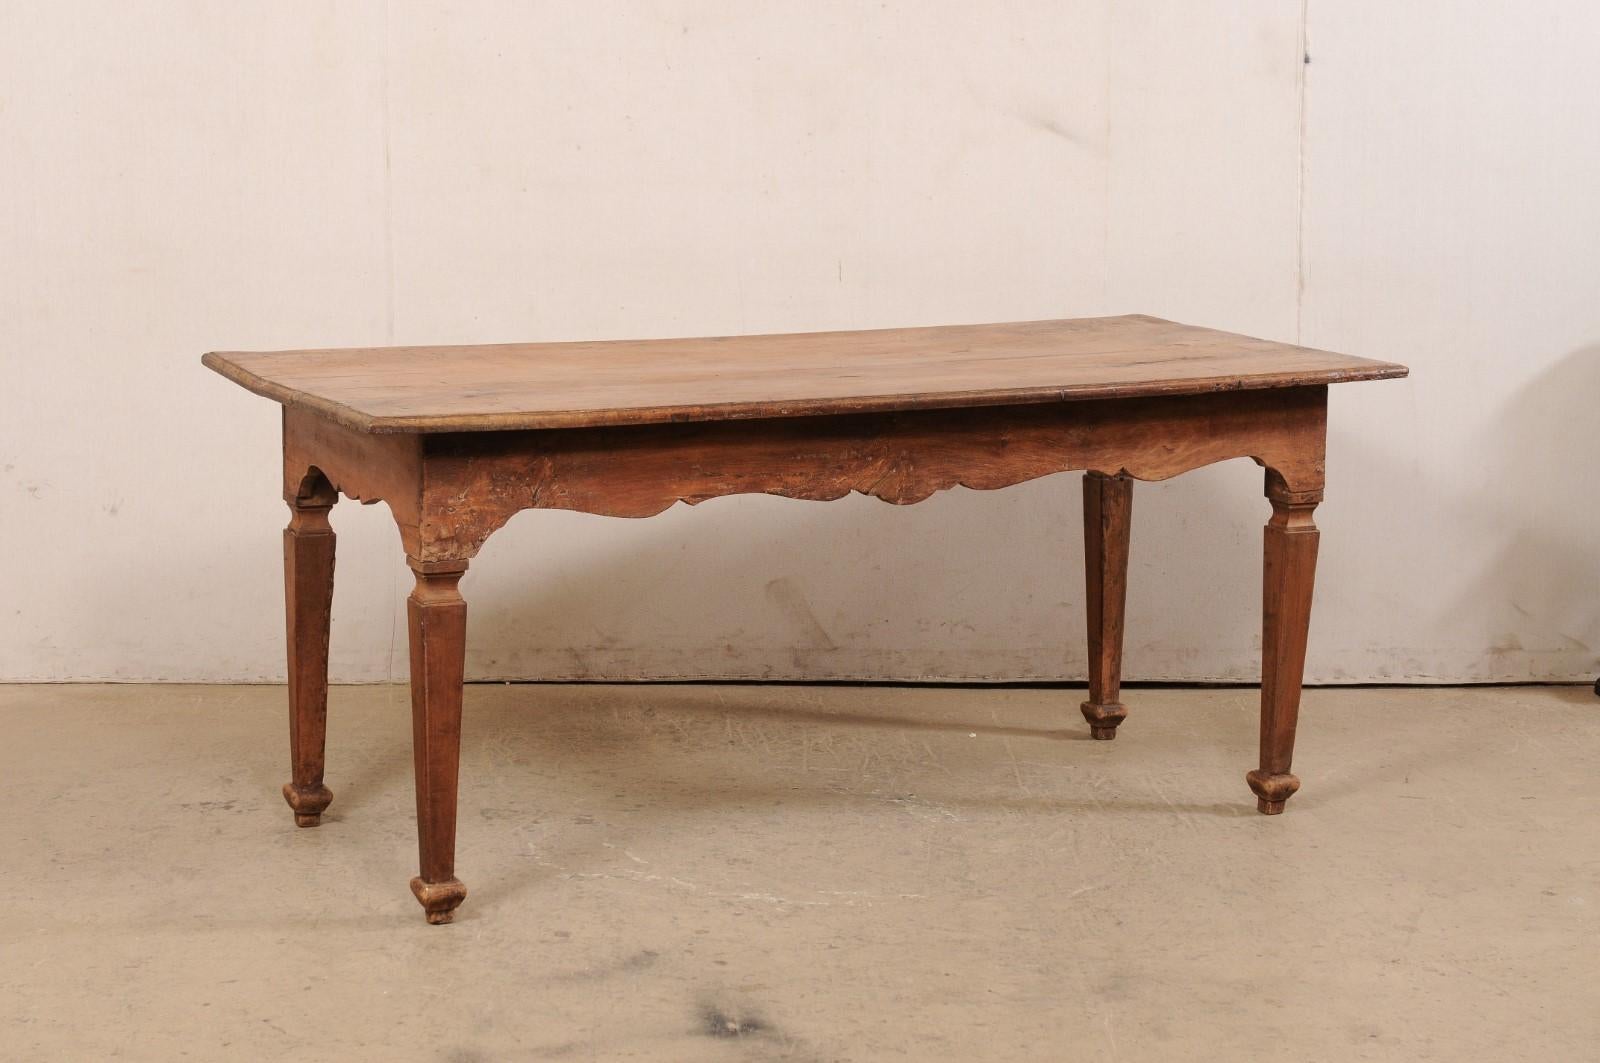 An Italian rustic carved-walnut farm table from the turn of the 18th and 19th century. This antique table from Italy has a rectangular-shaped top which overhangs the apron below which has beautifully carved skirting along all four sides, and is